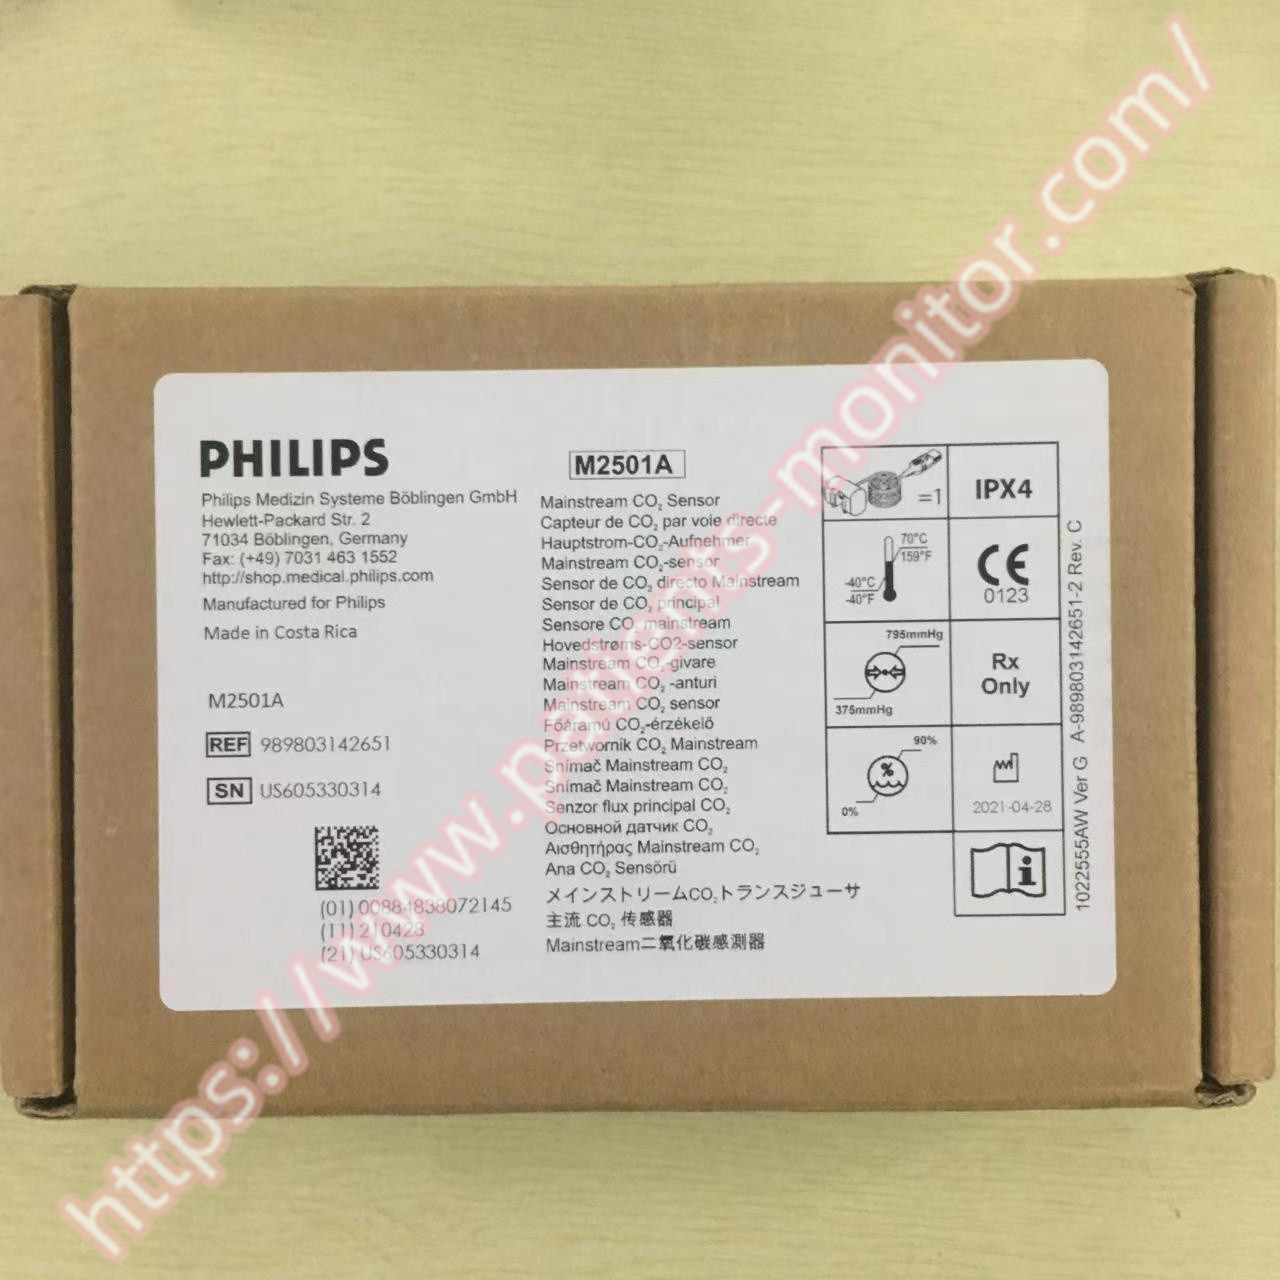  Philips CAPNOSTAT M2501A Patient Monitor CO2 Sensor Medical Equipment For Hospital Manufactures